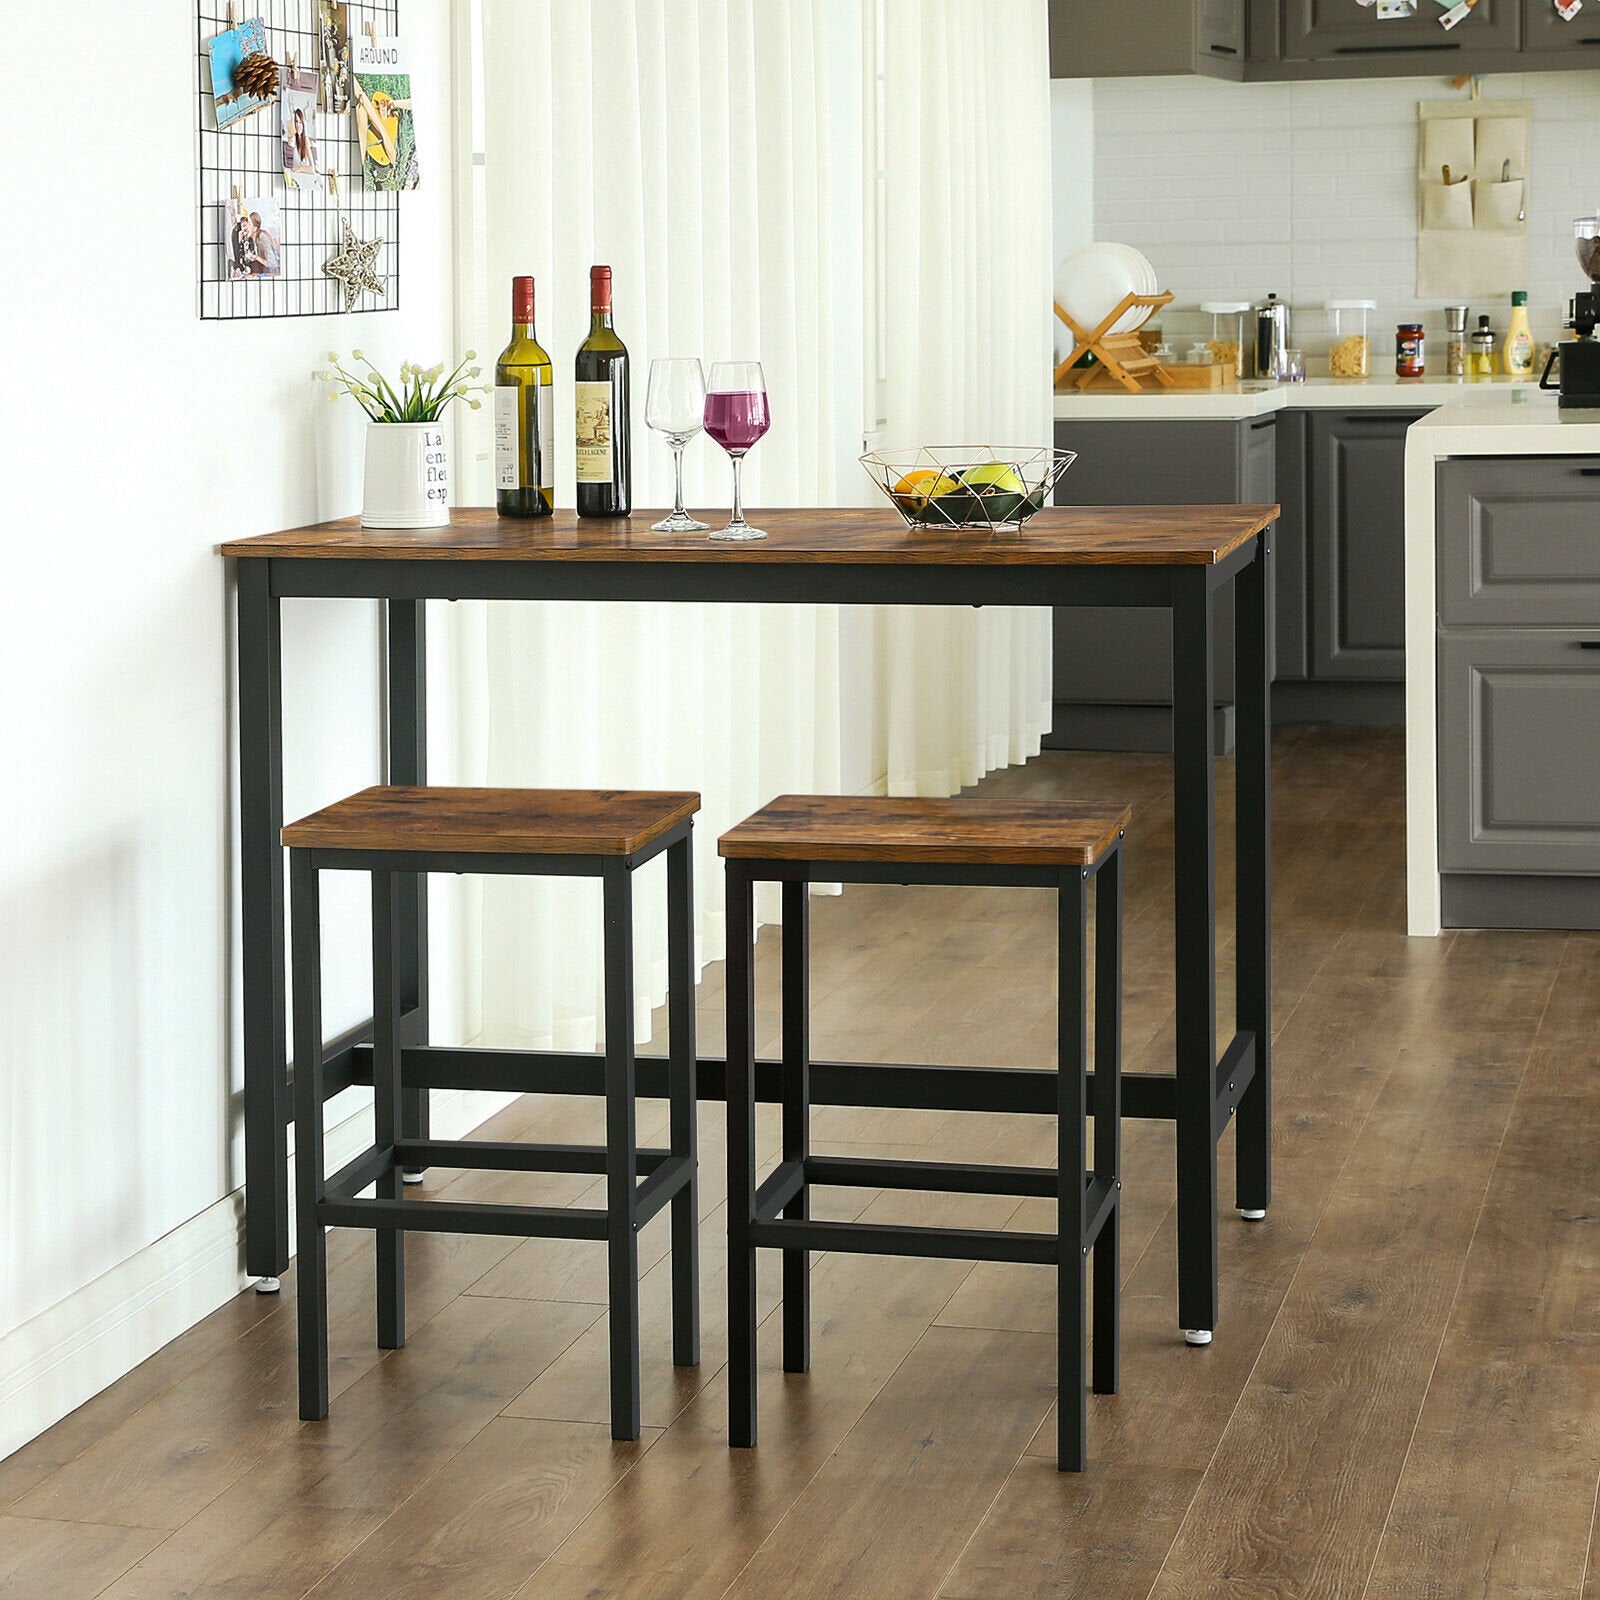 High Breakfast Table Bar Set with 2 Stools